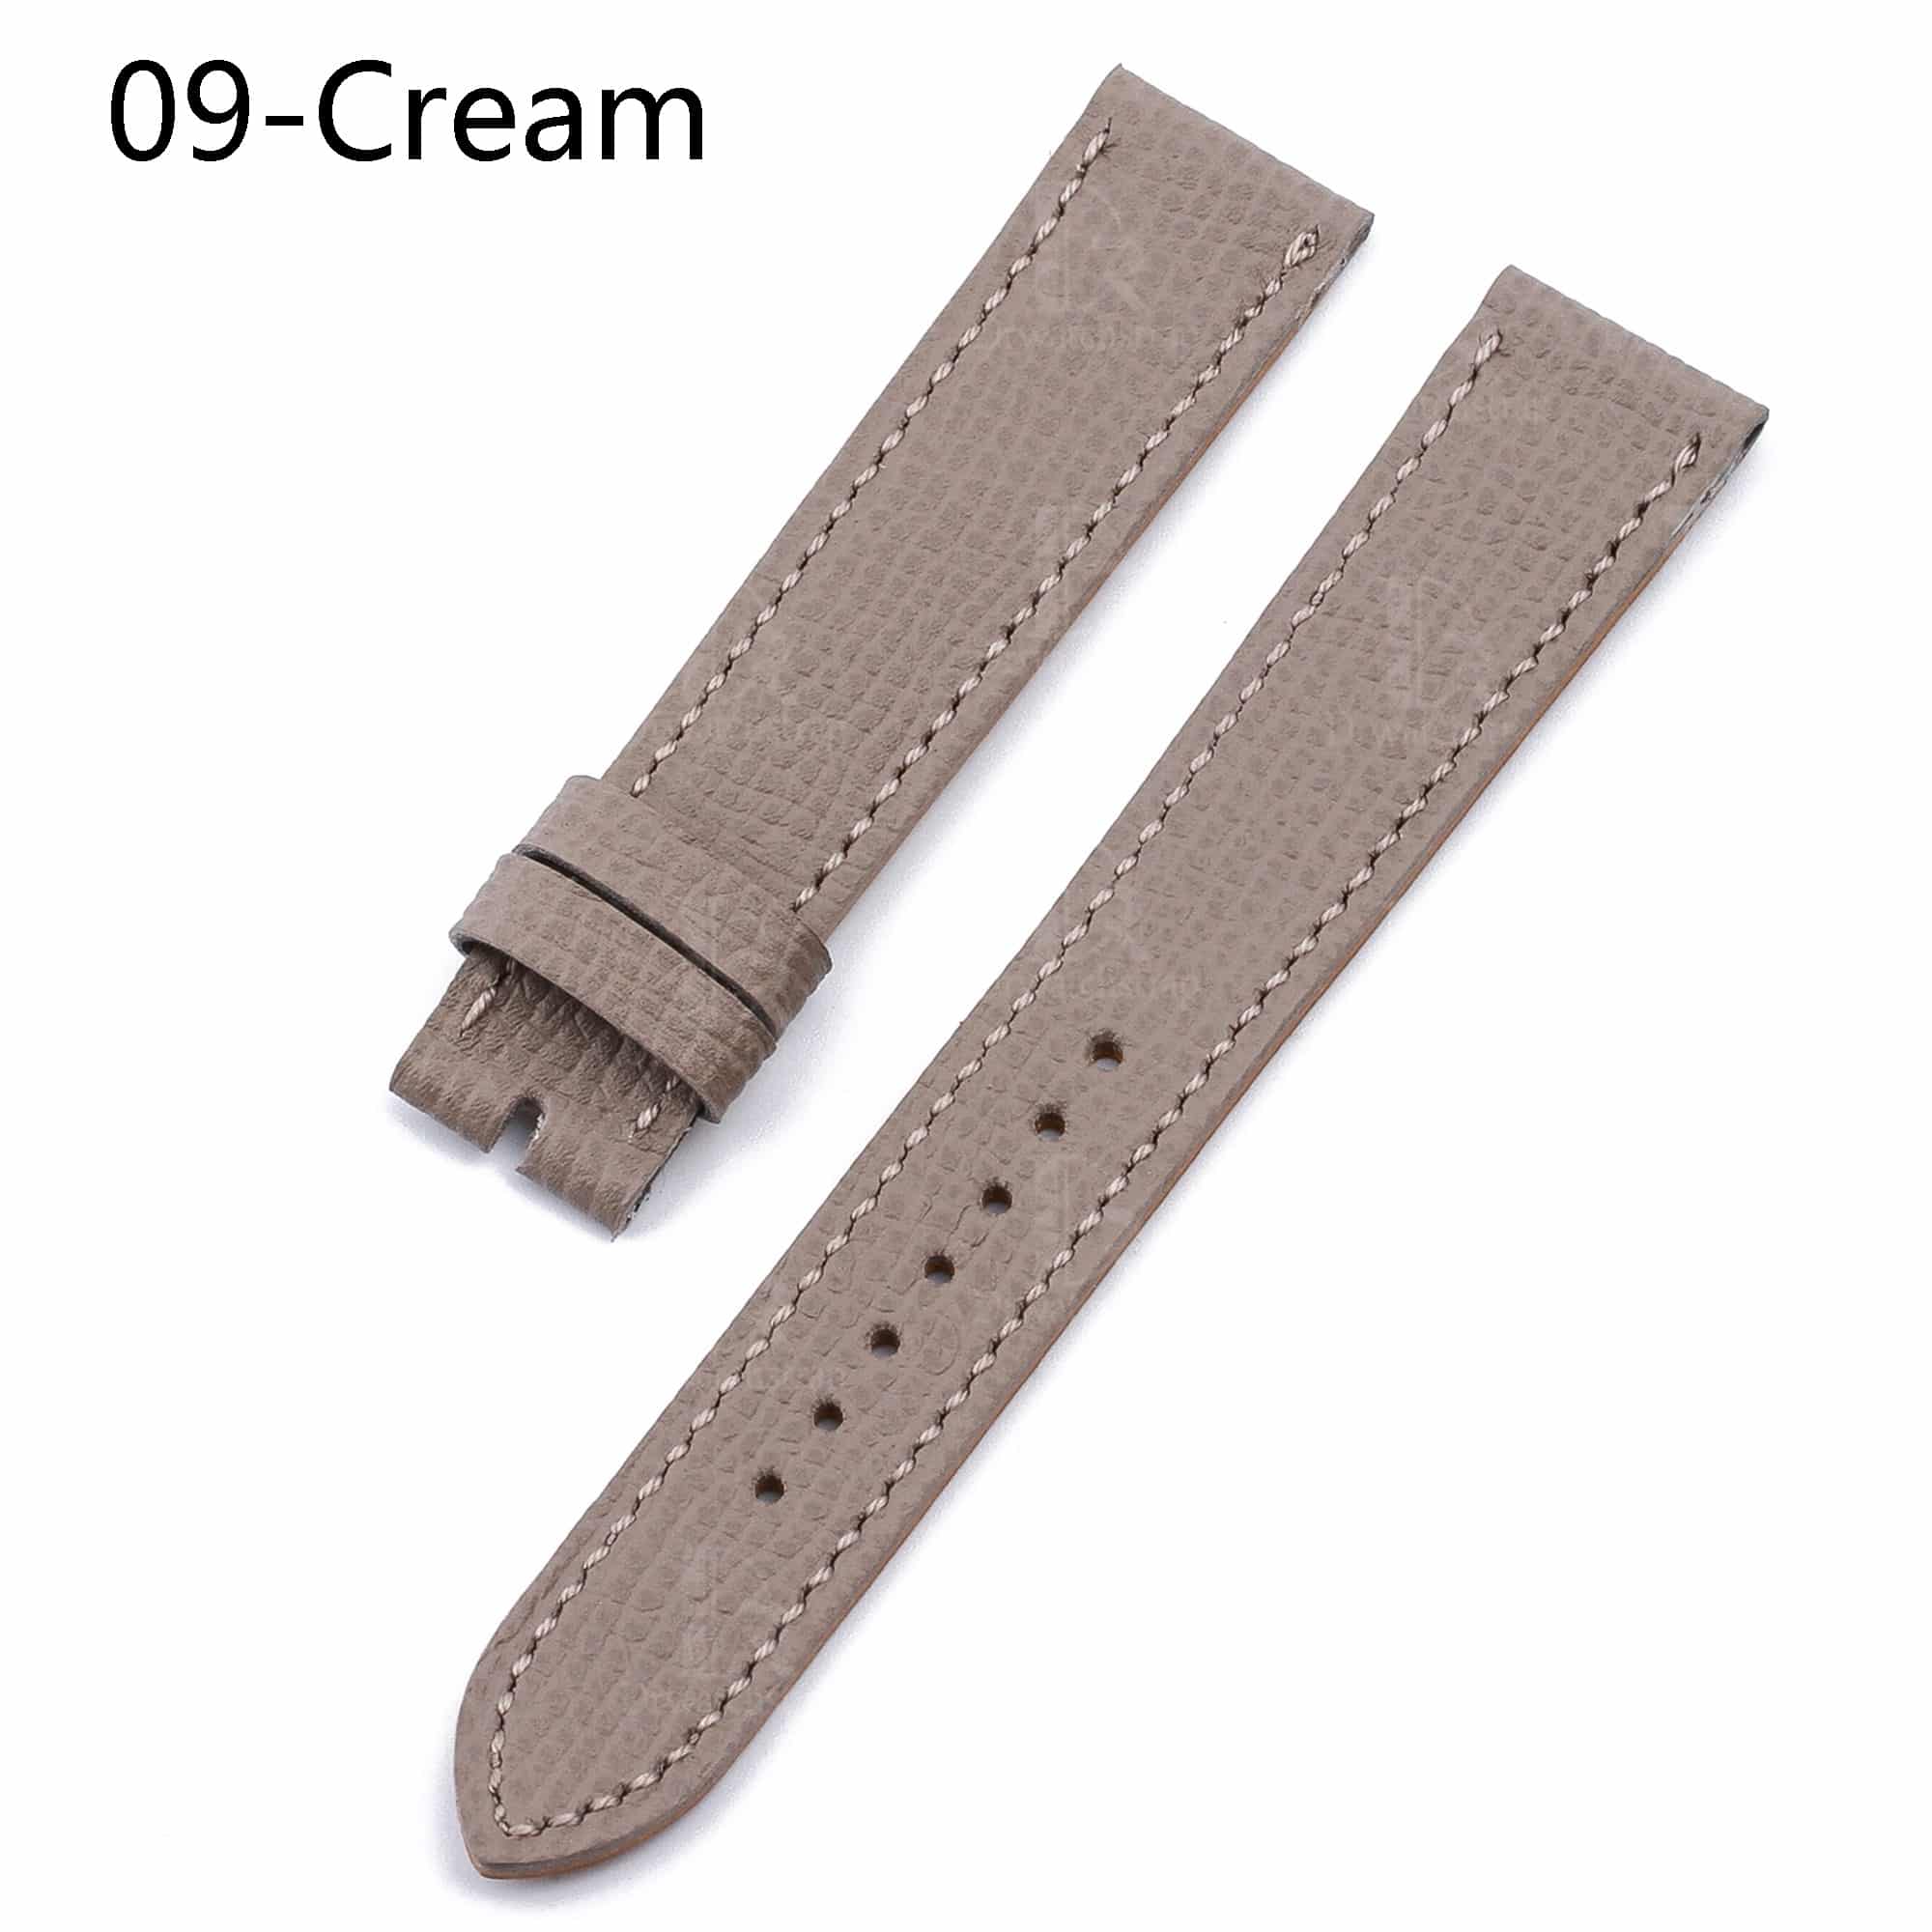 Hermes cape cod watch strap Grey Single tour sport band replacement for sale